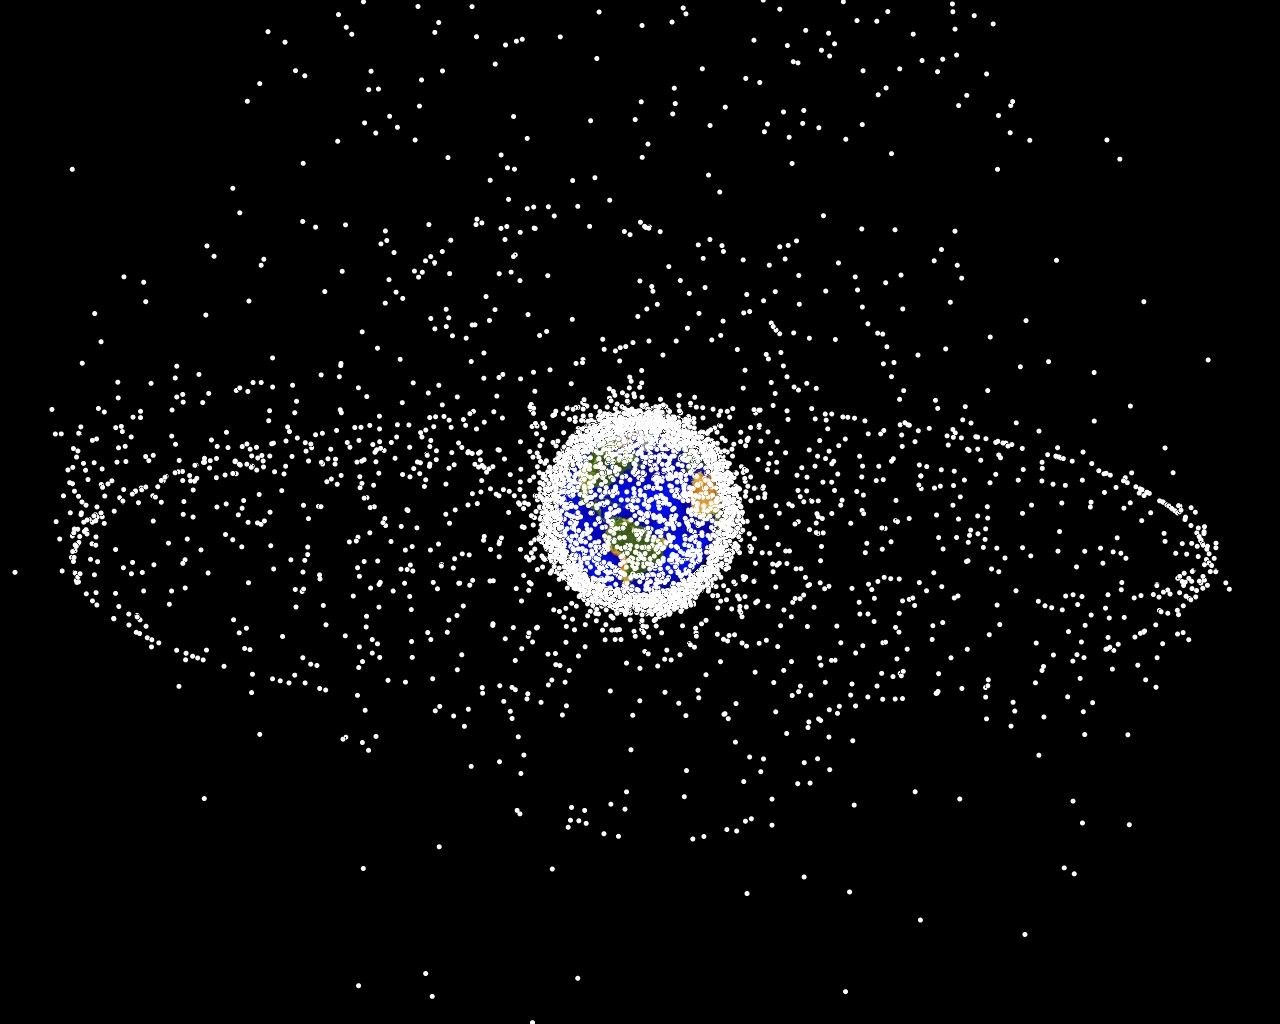 Image of space debris around Earth